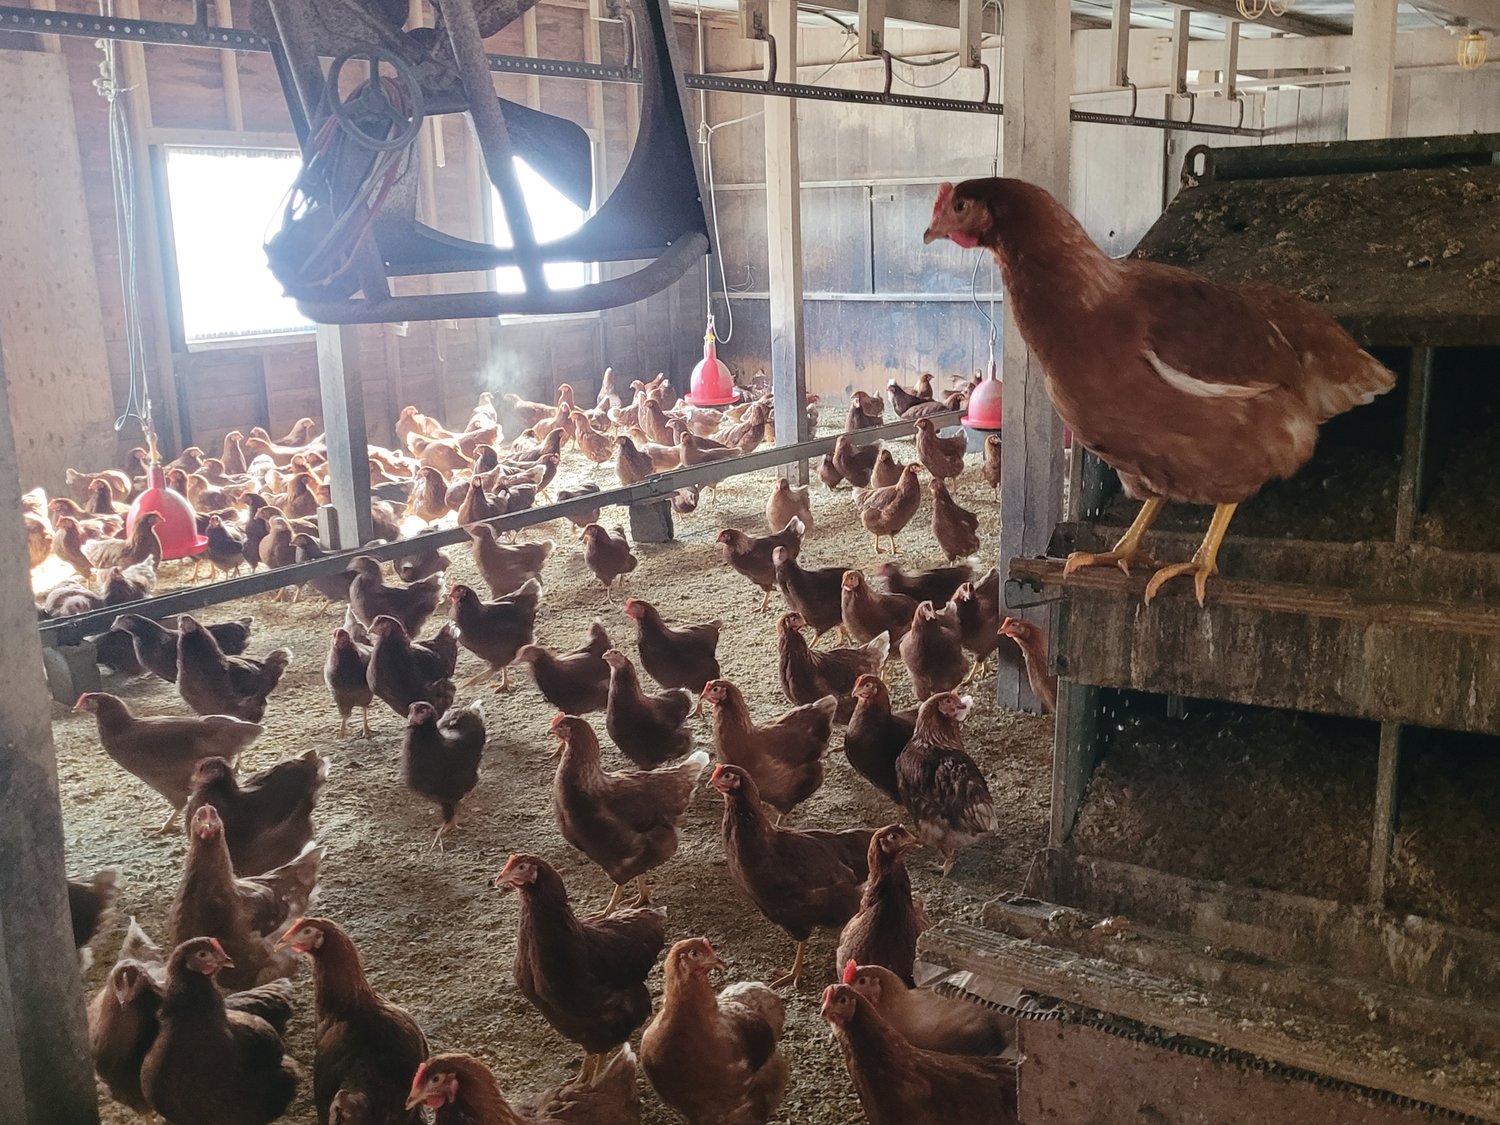 RI REDS: Nearly 20,000 chickens reside at Baffoni Poultry Farm in Johnston. Of those birds, nearly 8,000 egg-laying Rhode Island Red hens produce nearly 4,000 eggs daily.